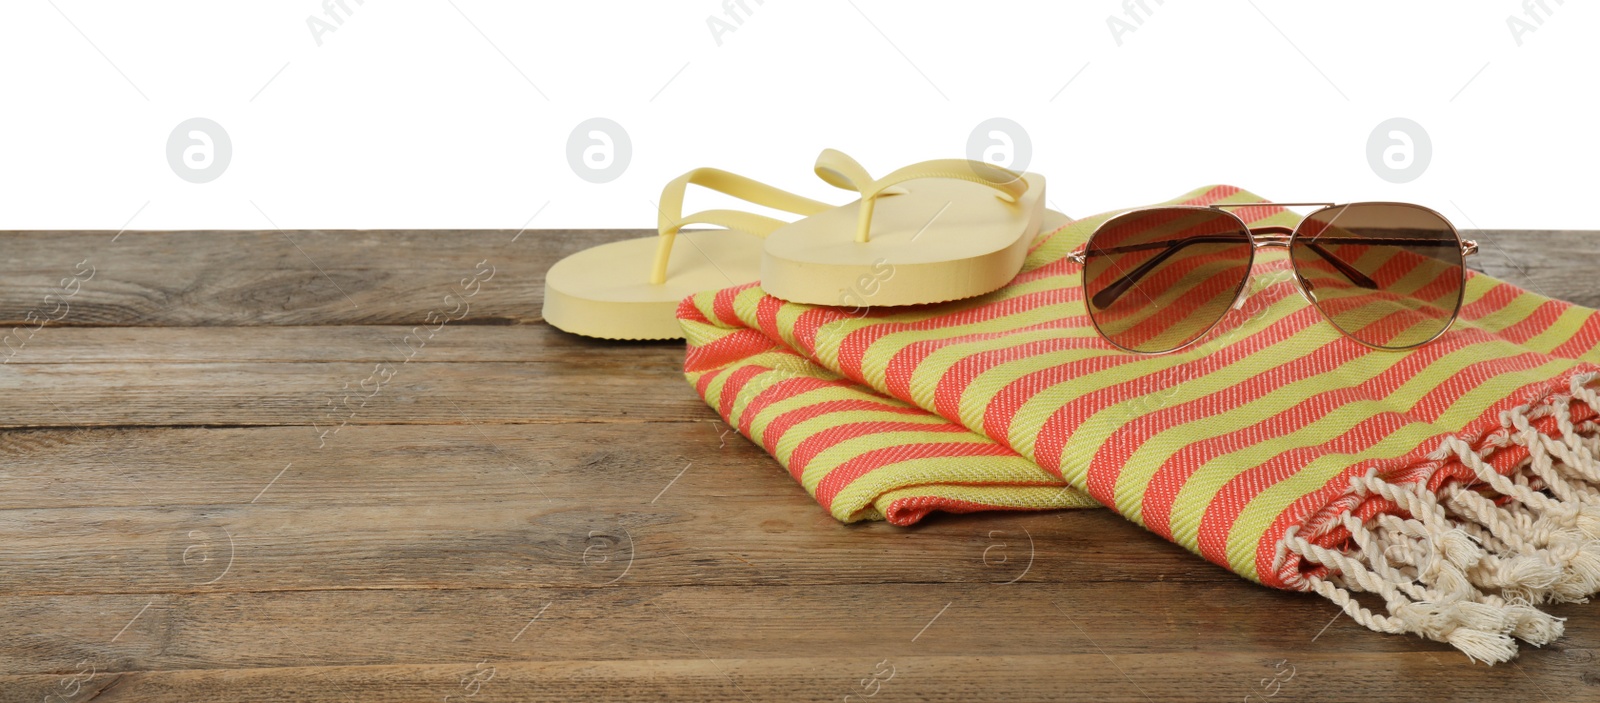 Photo of Beach towel, flip flops and sunglasses on wooden surface against white background. Space for text